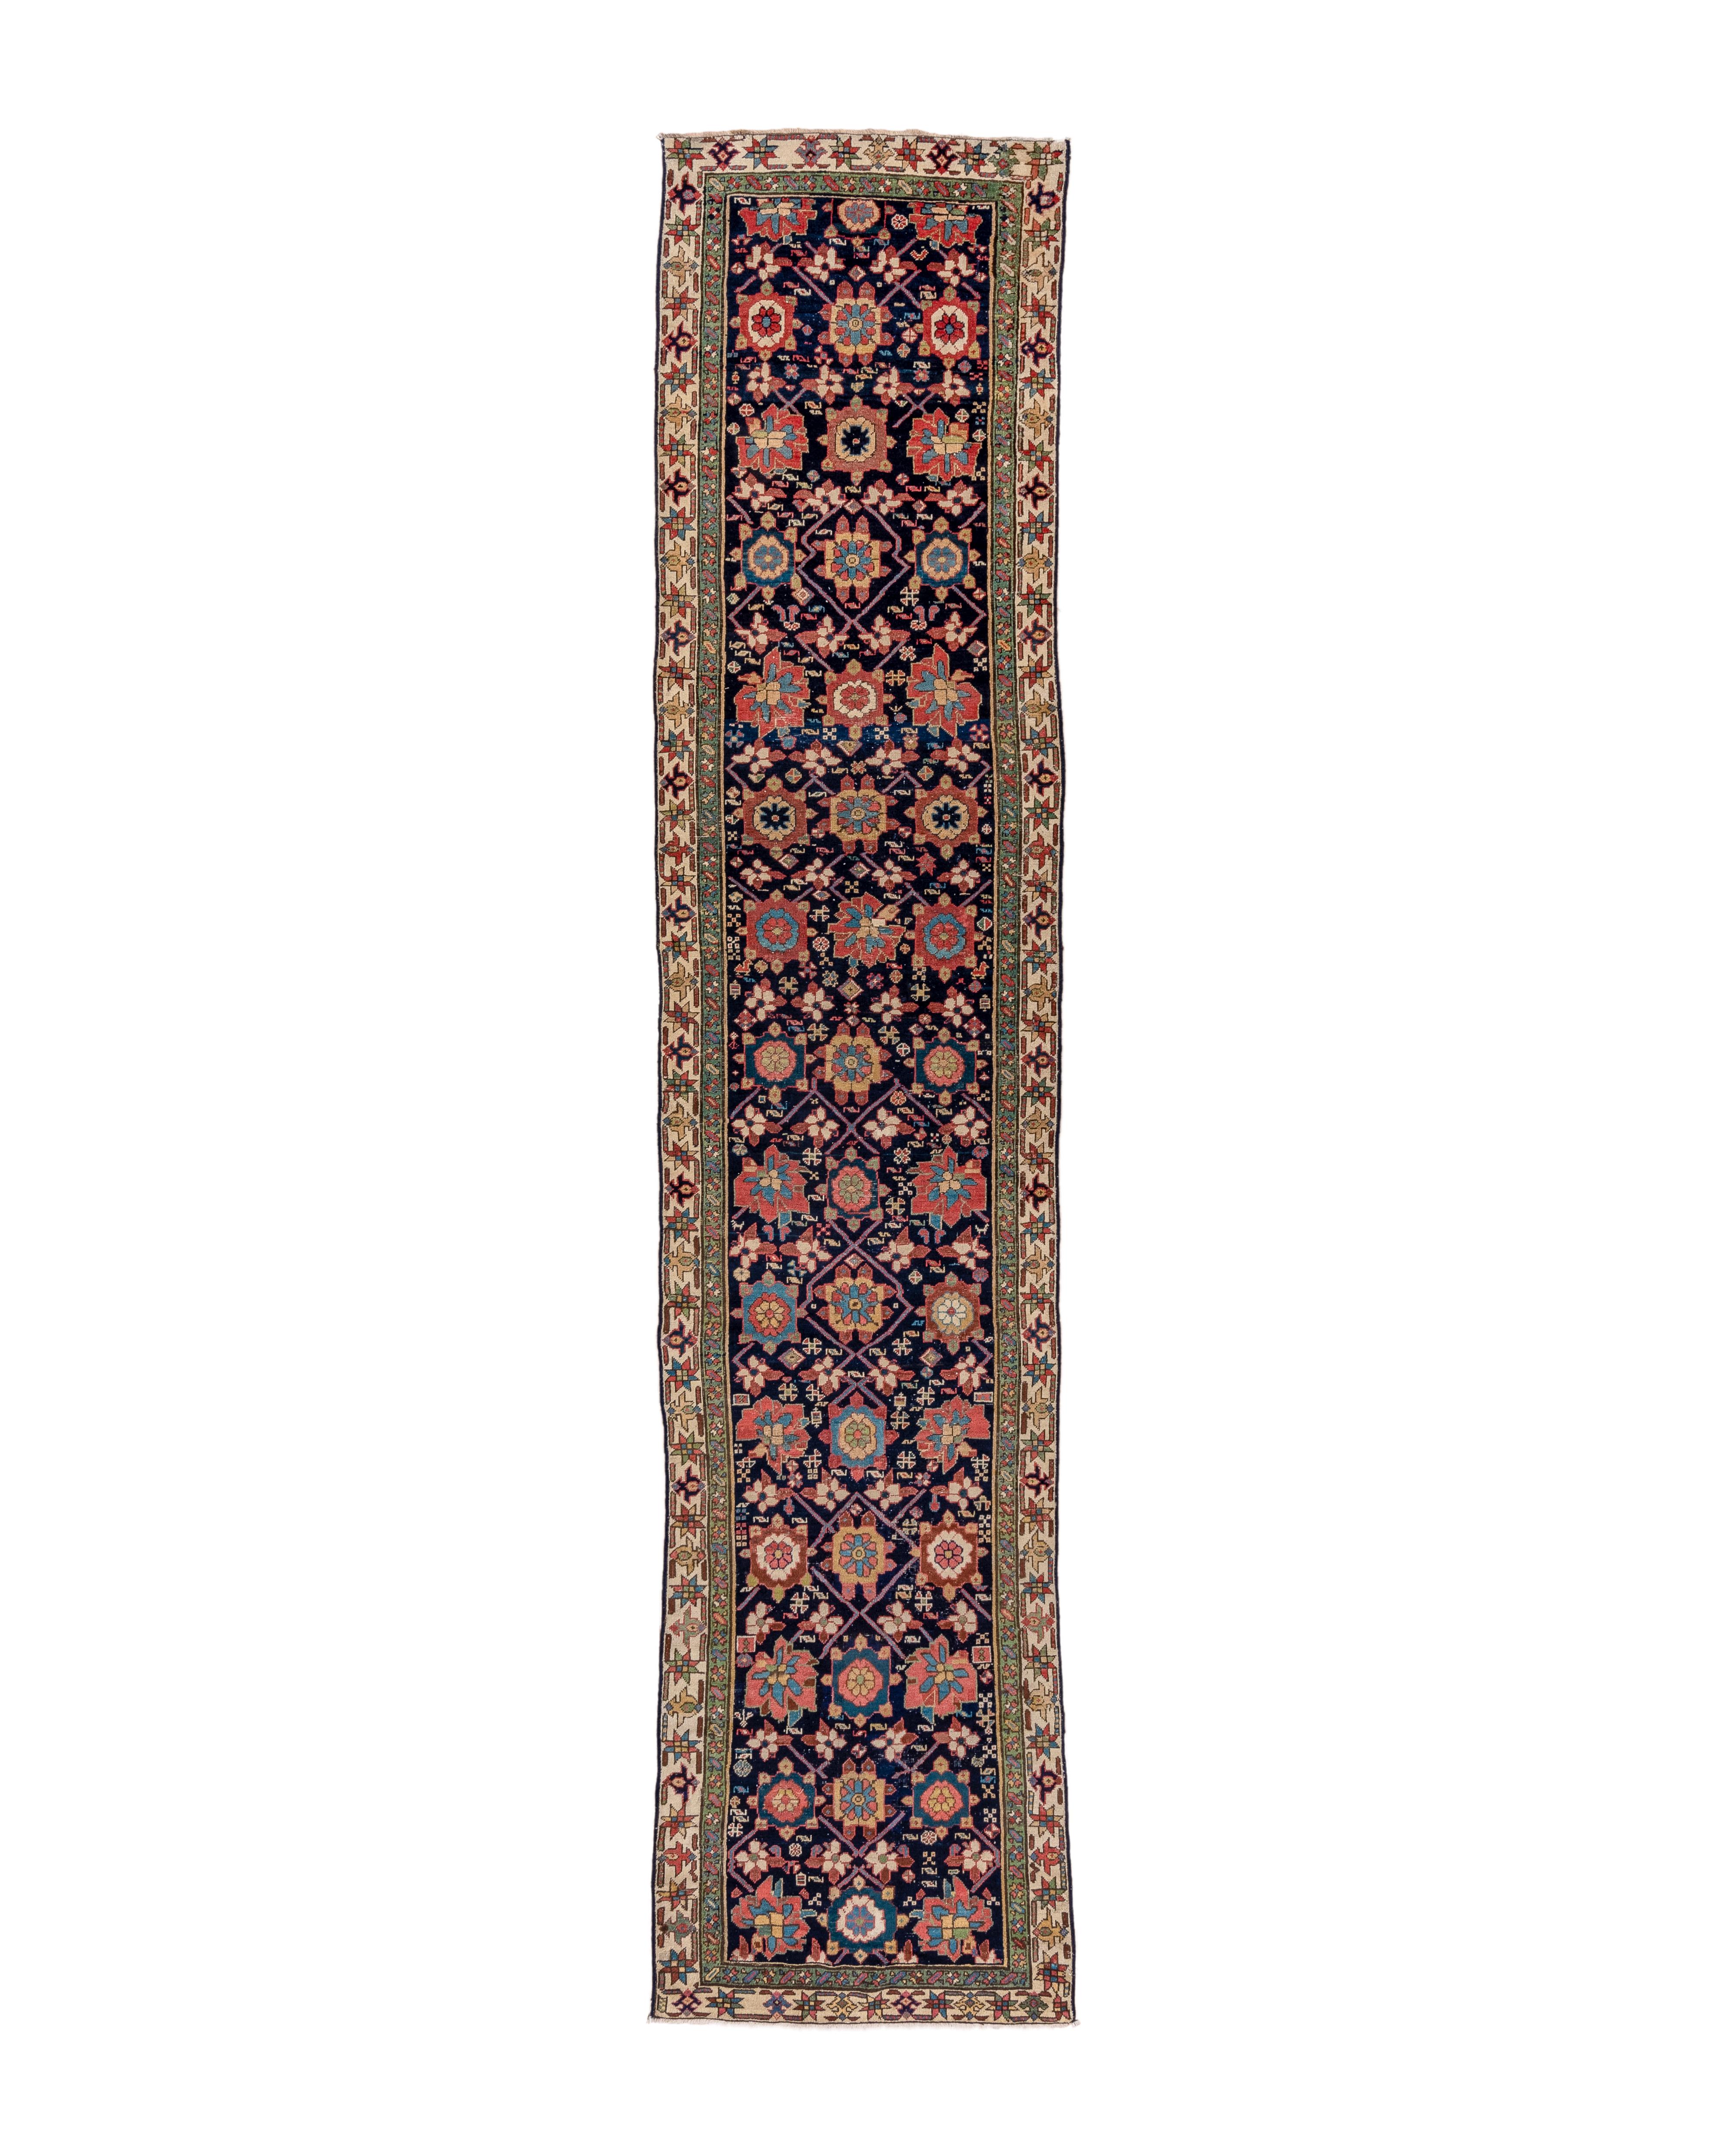 First quarter 20th century
This attractive, medium-weave piece from west-central Persia shows an elaborately developed Mina Khani design especially popular in this area. The navy field features a lozengoid lattice with two kinds of rosettes,,